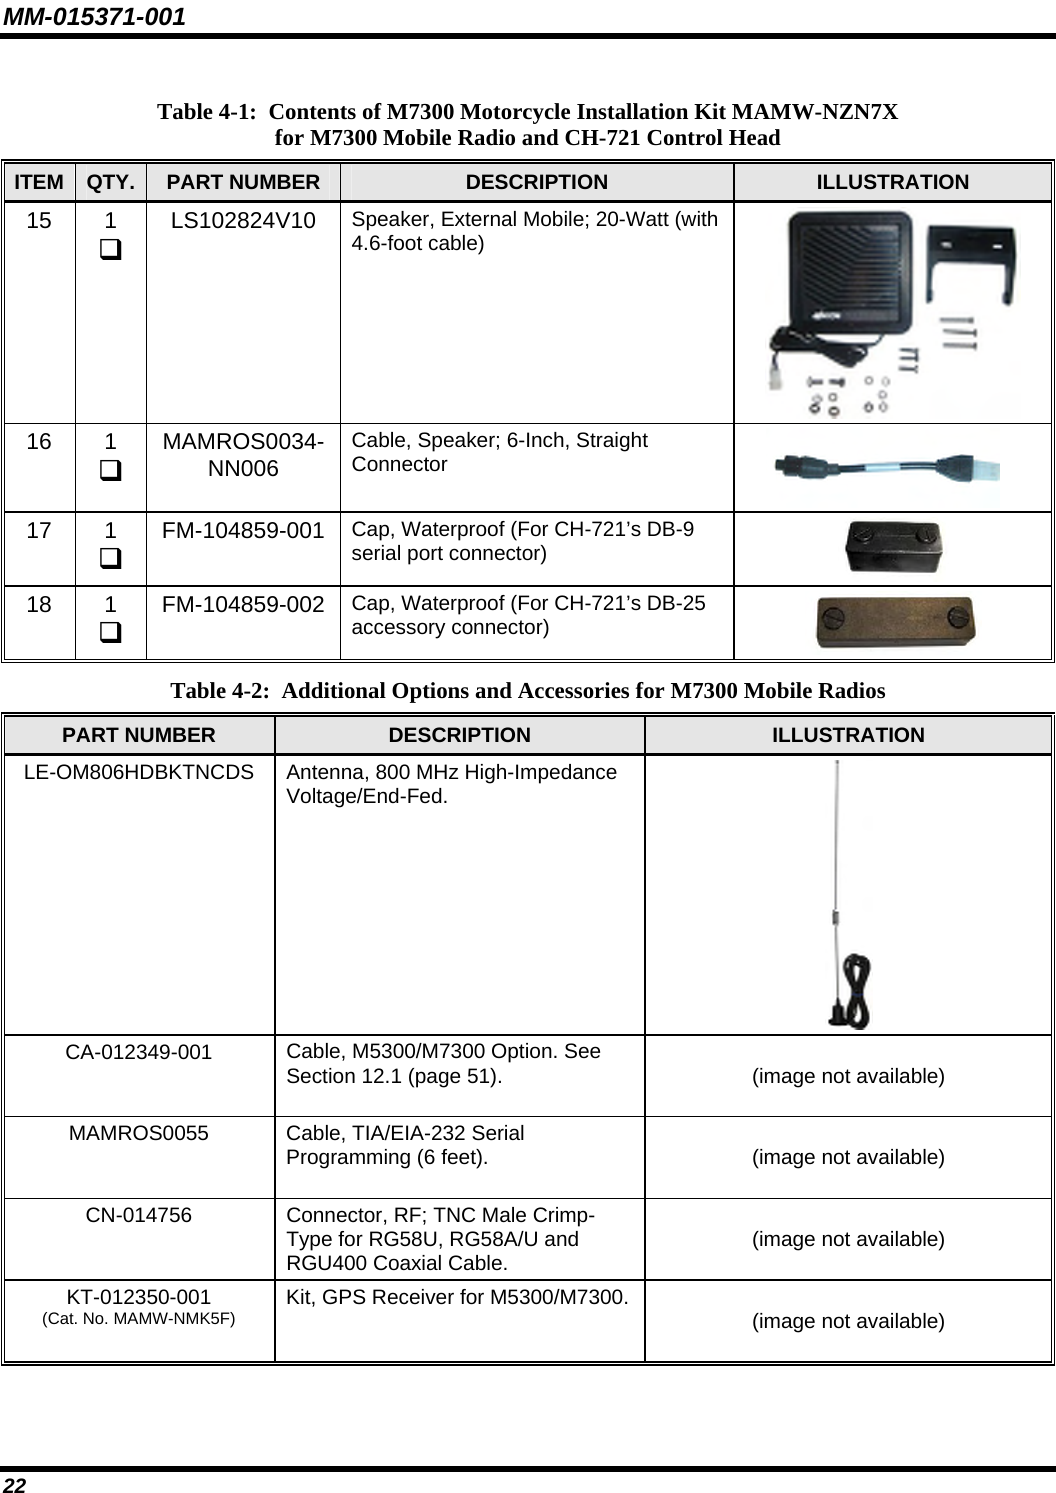 MM-015371-001 22 Table 4-1:  Contents of M7300 Motorcycle Installation Kit MAMW-NZfor M7300 Mobile Radio and CH-721 Control Head  N7X ITEM  QTY.  PART NUMBER  DESCRIPTION  ILLUSTRATION 15 1  LS102824V10  Speaker, External Mobile; 20-Watt (with 4.6-foot cable)  16 1  MAMROS0034-NN006 Cable, Speaker; 6-Inch, Straight Connector  17 1  FM-104859-001  Cap, Waterproof (For CH-721’s DB-9 serial port connector)  18 1  FM-104859-002  Cap, Waterproof (For CH-721’s DB-25 accessory connector)   Table 4-2:  Additional Options and Accessories for M7300 Mobile Radios PART NUMBER  DESCRIPTION  ILLUSTRATION LE-OM806HDBKTNCDS  Antenna, 800 MHz High-Impedance Voltage/End-Fed.  CA-012349-001  Cable, M5300/M7300 Option. See Section 12.1 (page 51).   (image not available)  MAMROS0055  Cable, TIA/EIA-232 Serial Programming (6 feet).   (image not available)  CN-014756  Connector, RF; TNC Male Crimp-Type for RG58U, RG58A/U and RGU400 Coaxial Cable.  (image not available)  KT-012350-001 (Cat. No. MAMW-NMK5F) Kit, GPS Receiver for M5300/M7300.   (image not available)   